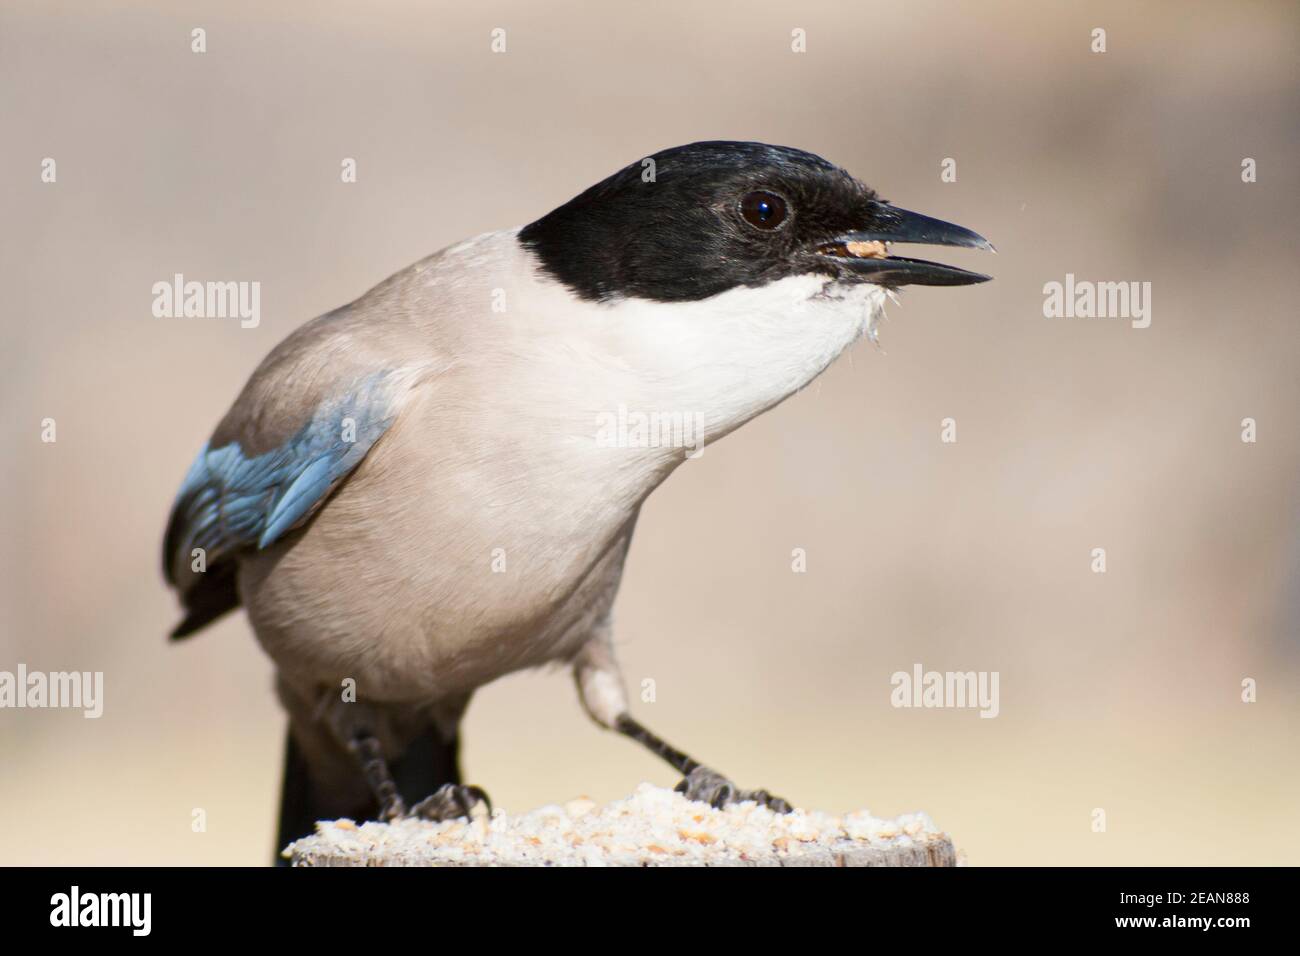 An Azure-winged magpie in the Monfrague National Park. Cyanopica cyanus. Stock Photo